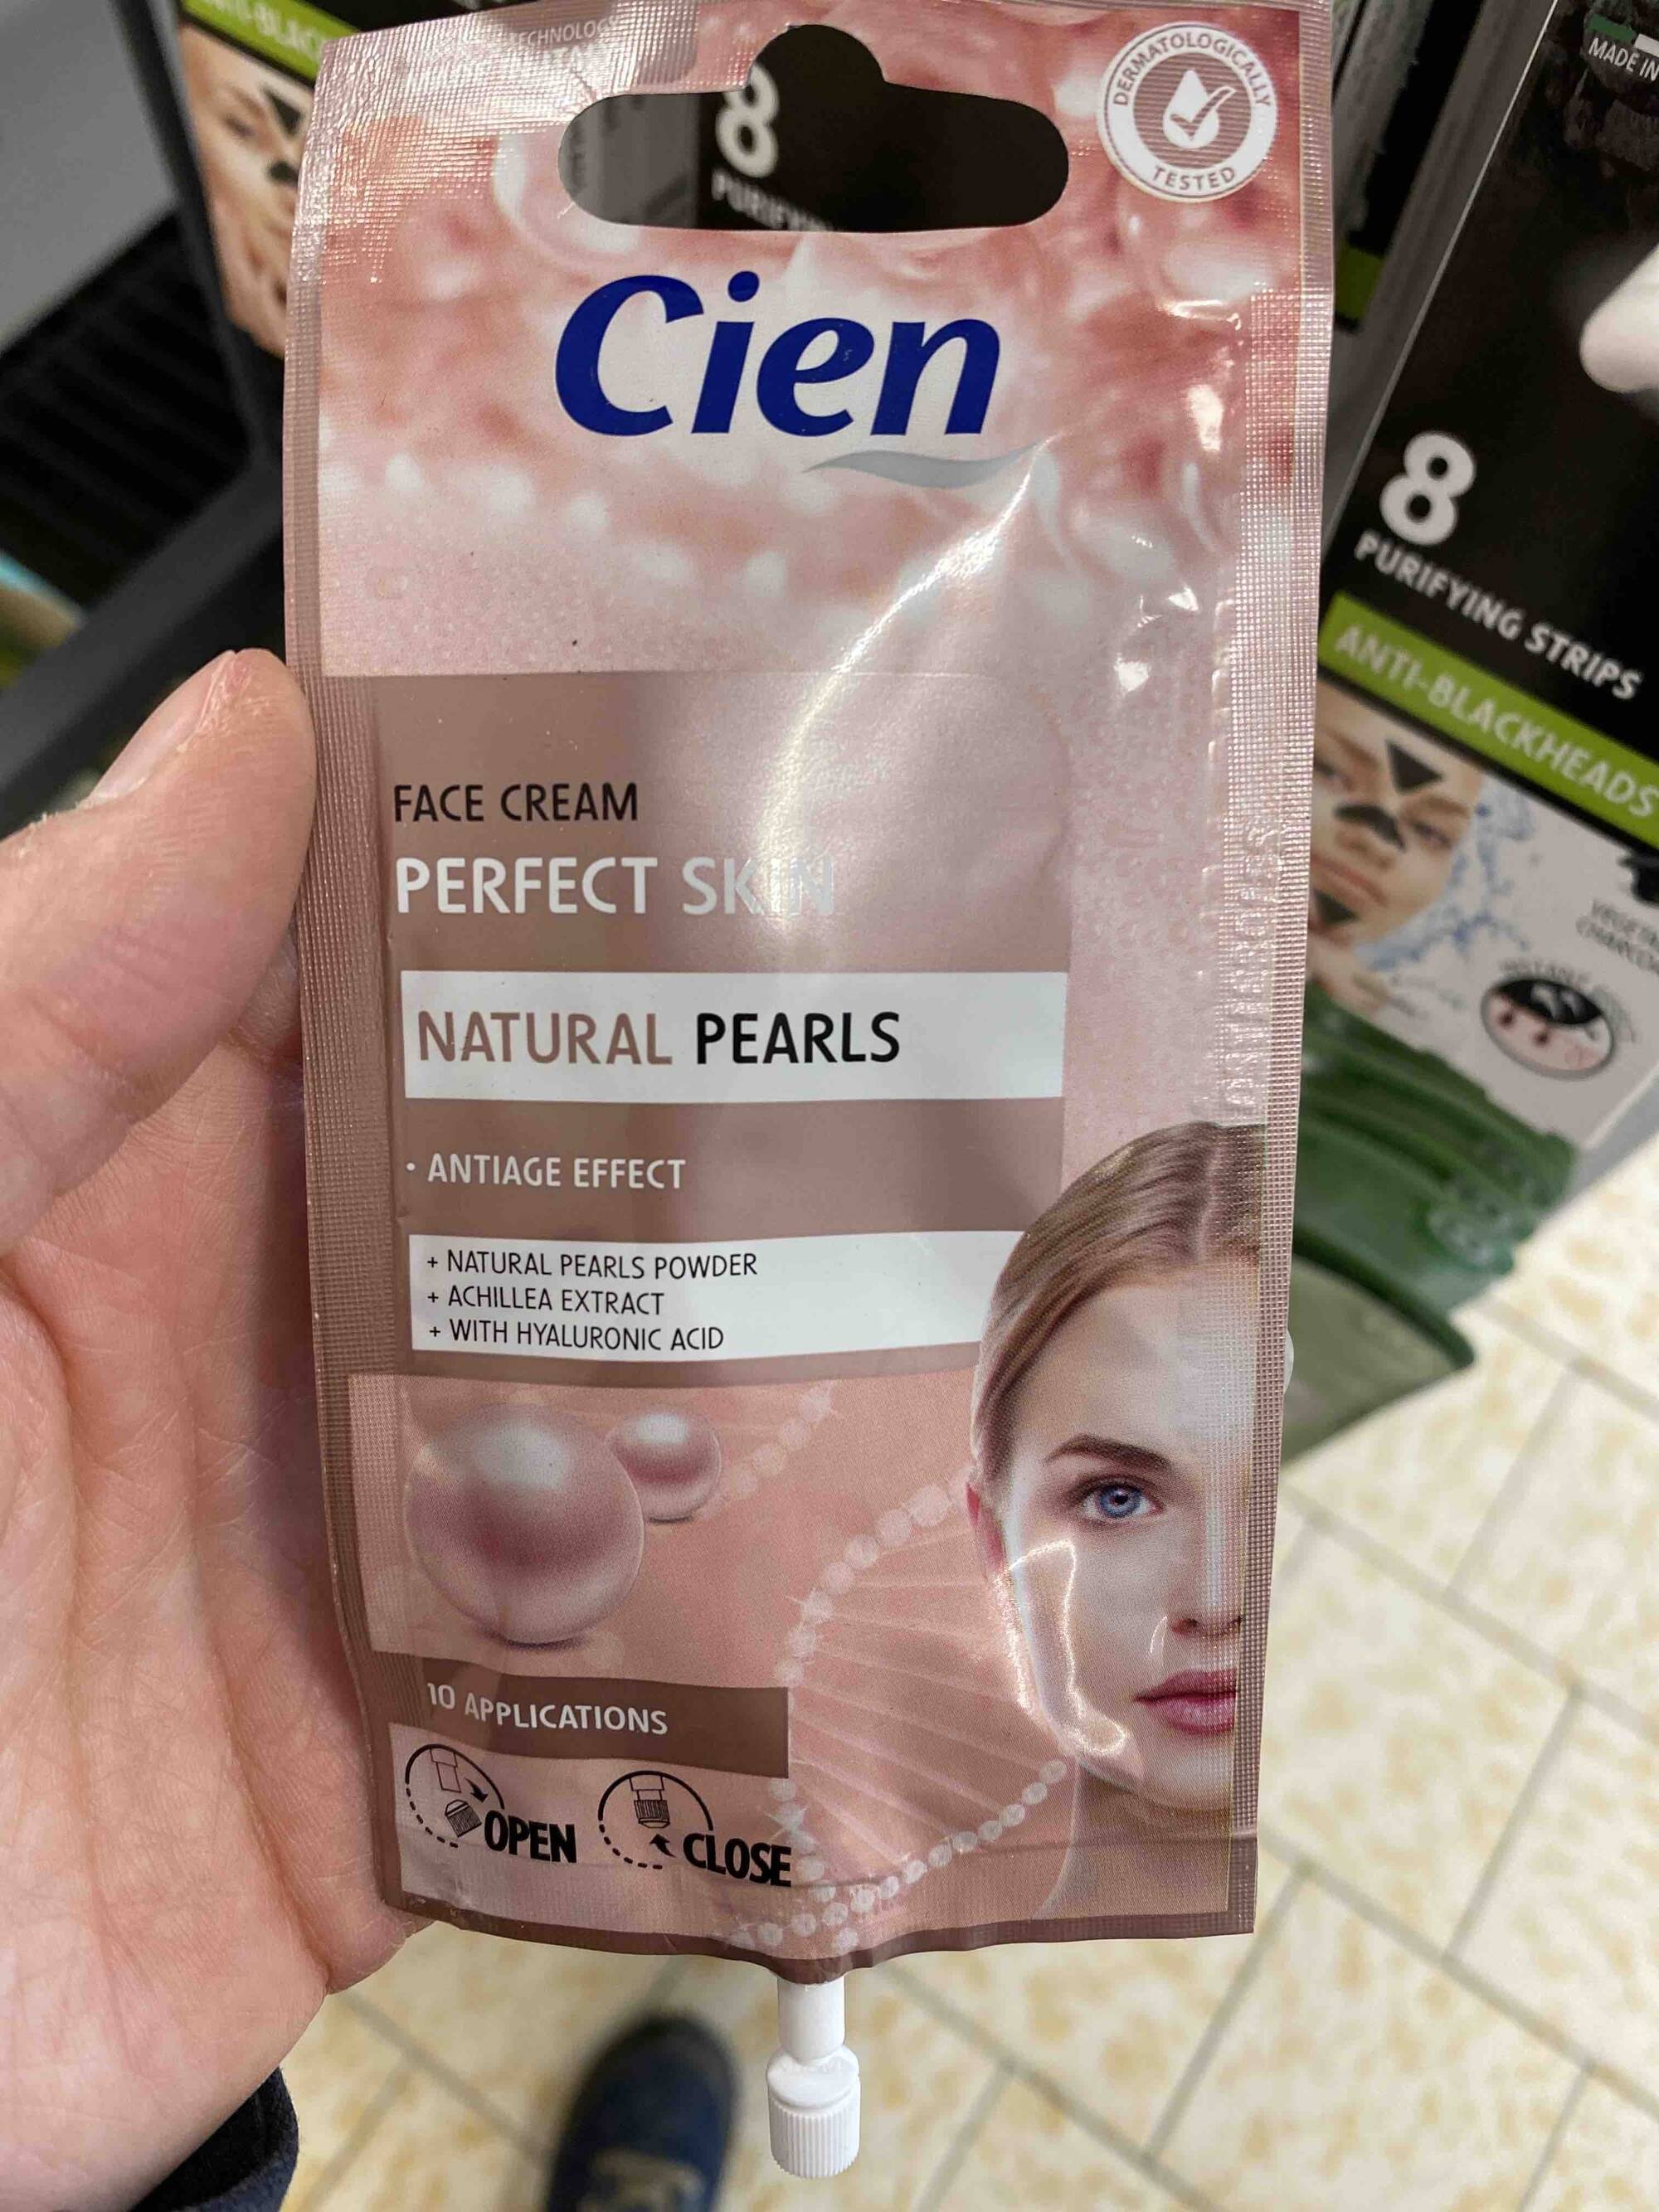 CIEN - Face cream perfect skin - Antiage effect